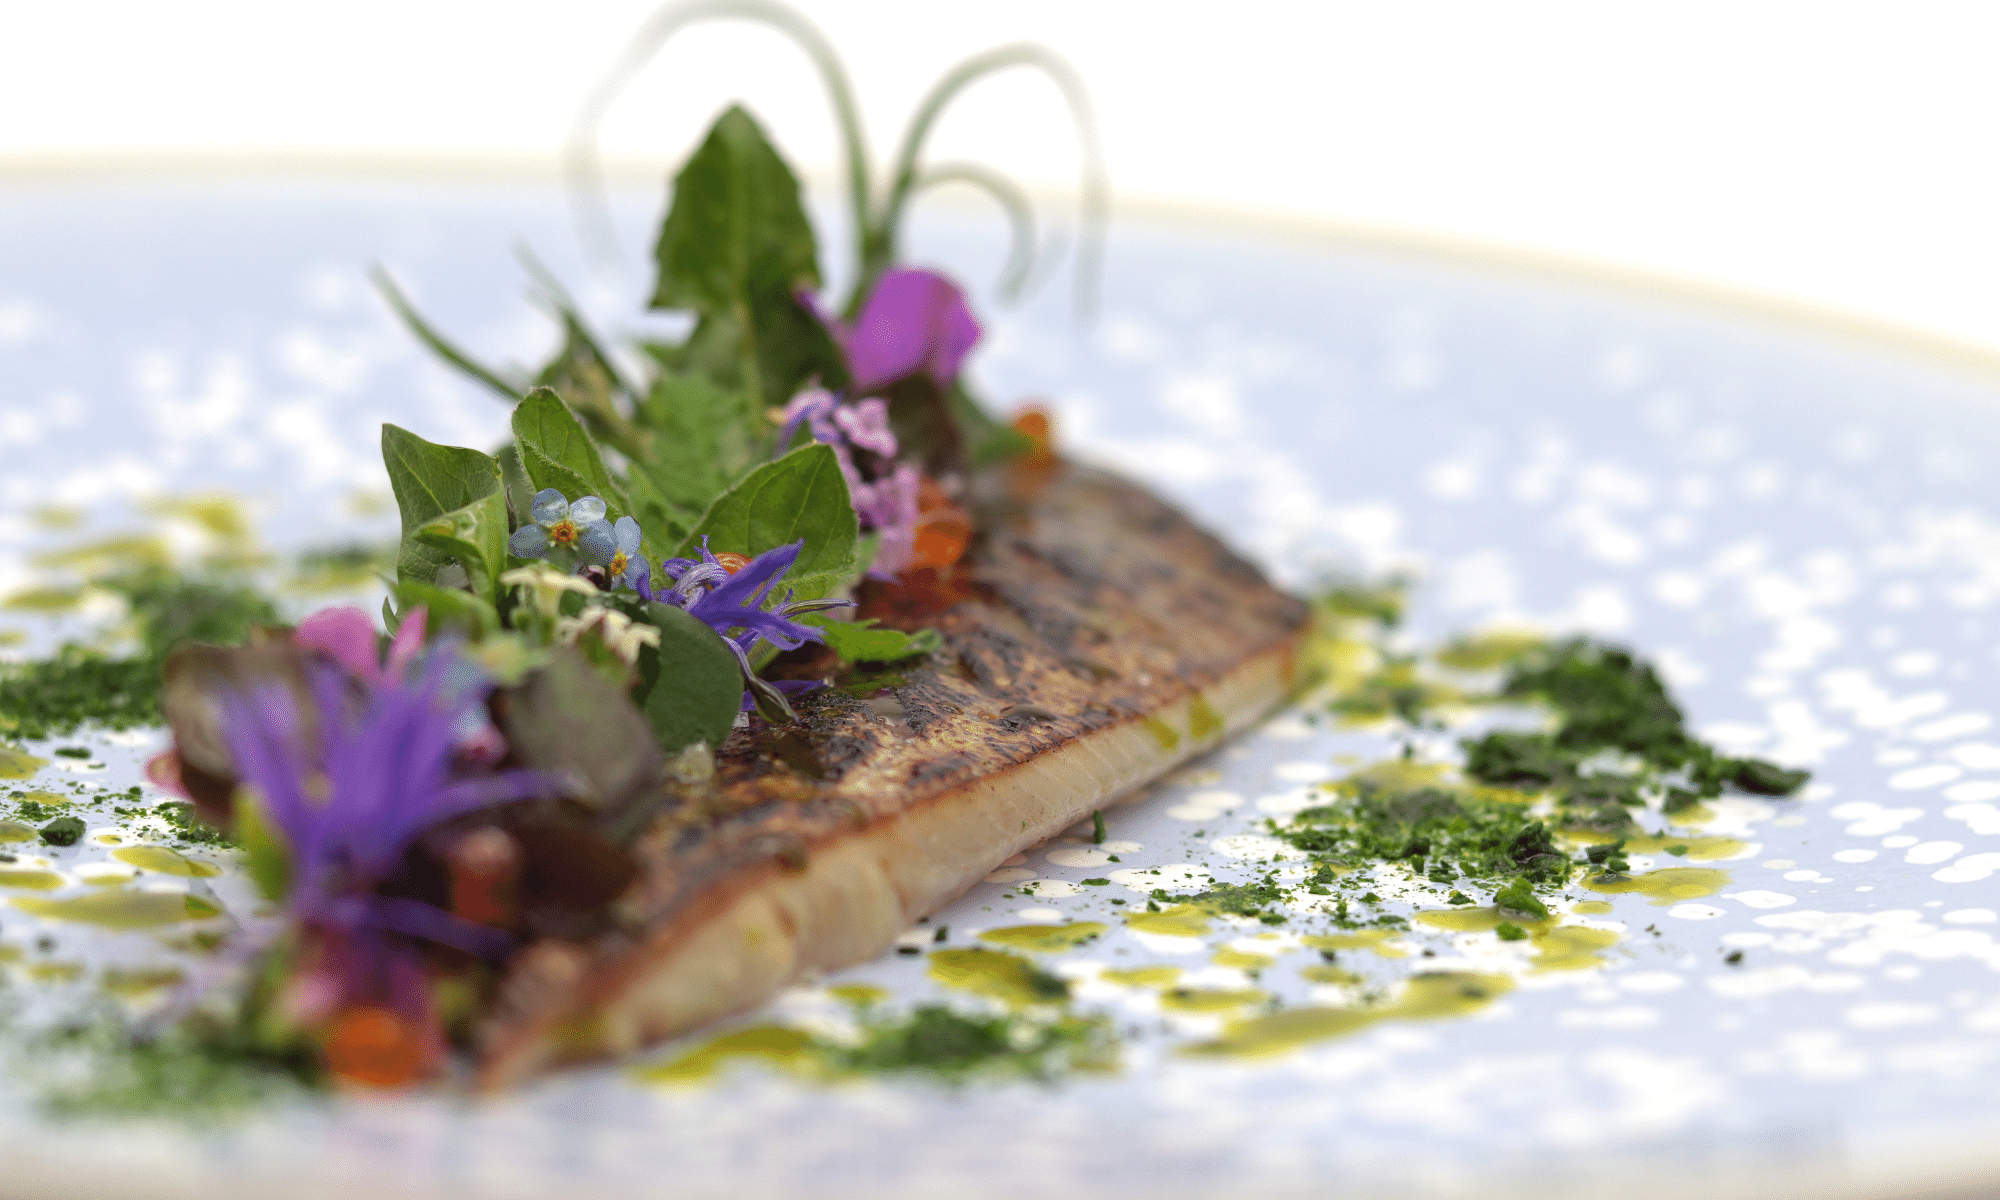 Gastronomic dish from the Valrose Restaurant Table - not in season - Rougemont - Valrose